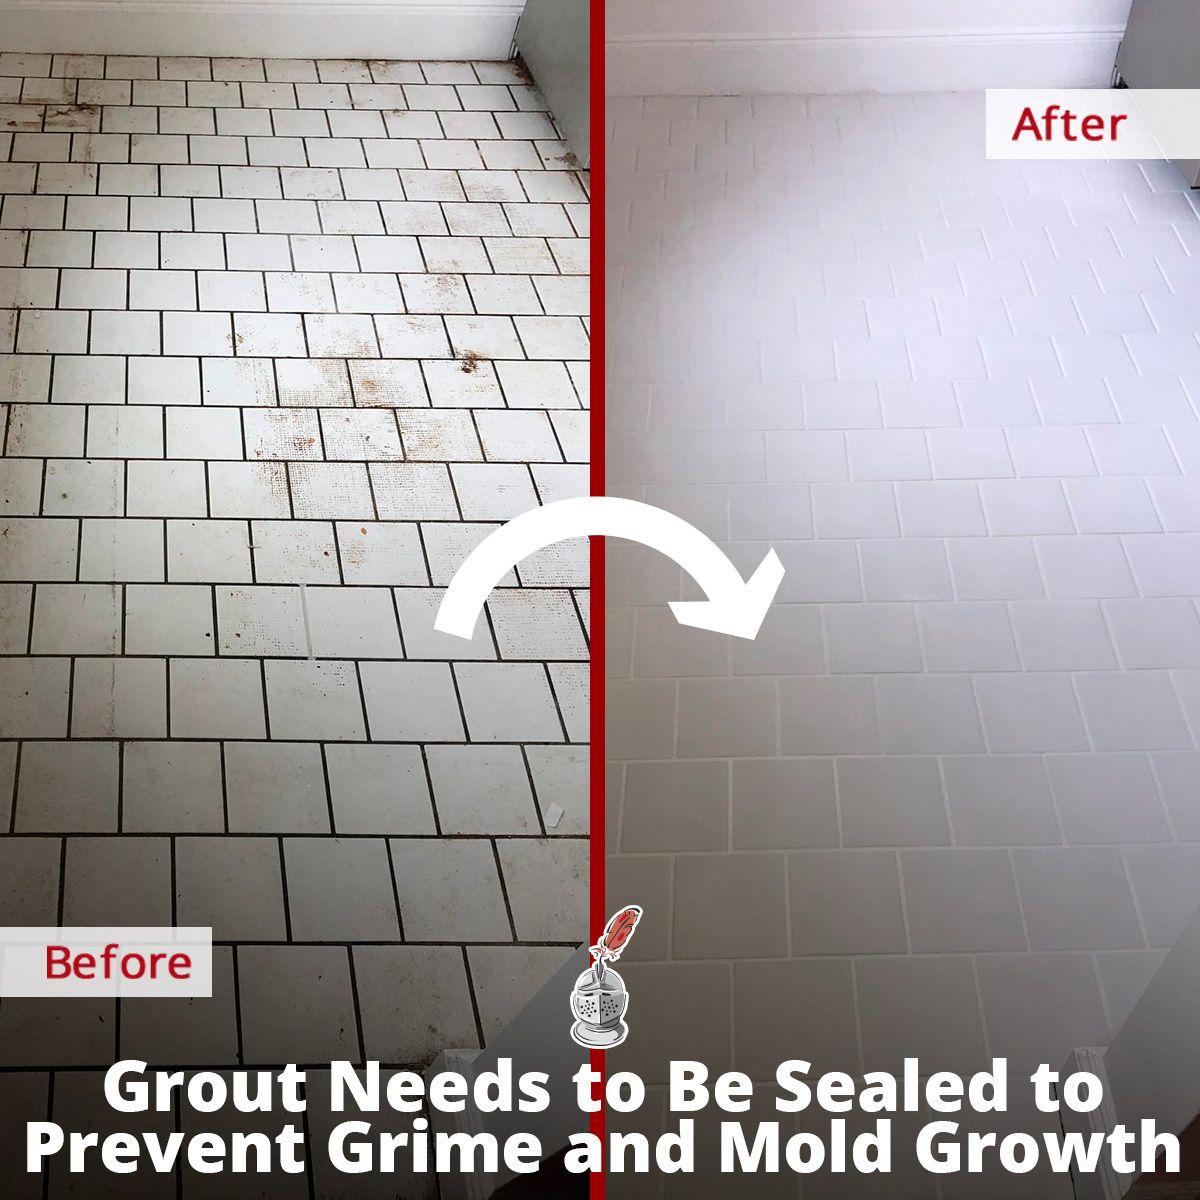 Grout Needs to Be Sealed to Prevent Grime and Mold Growth